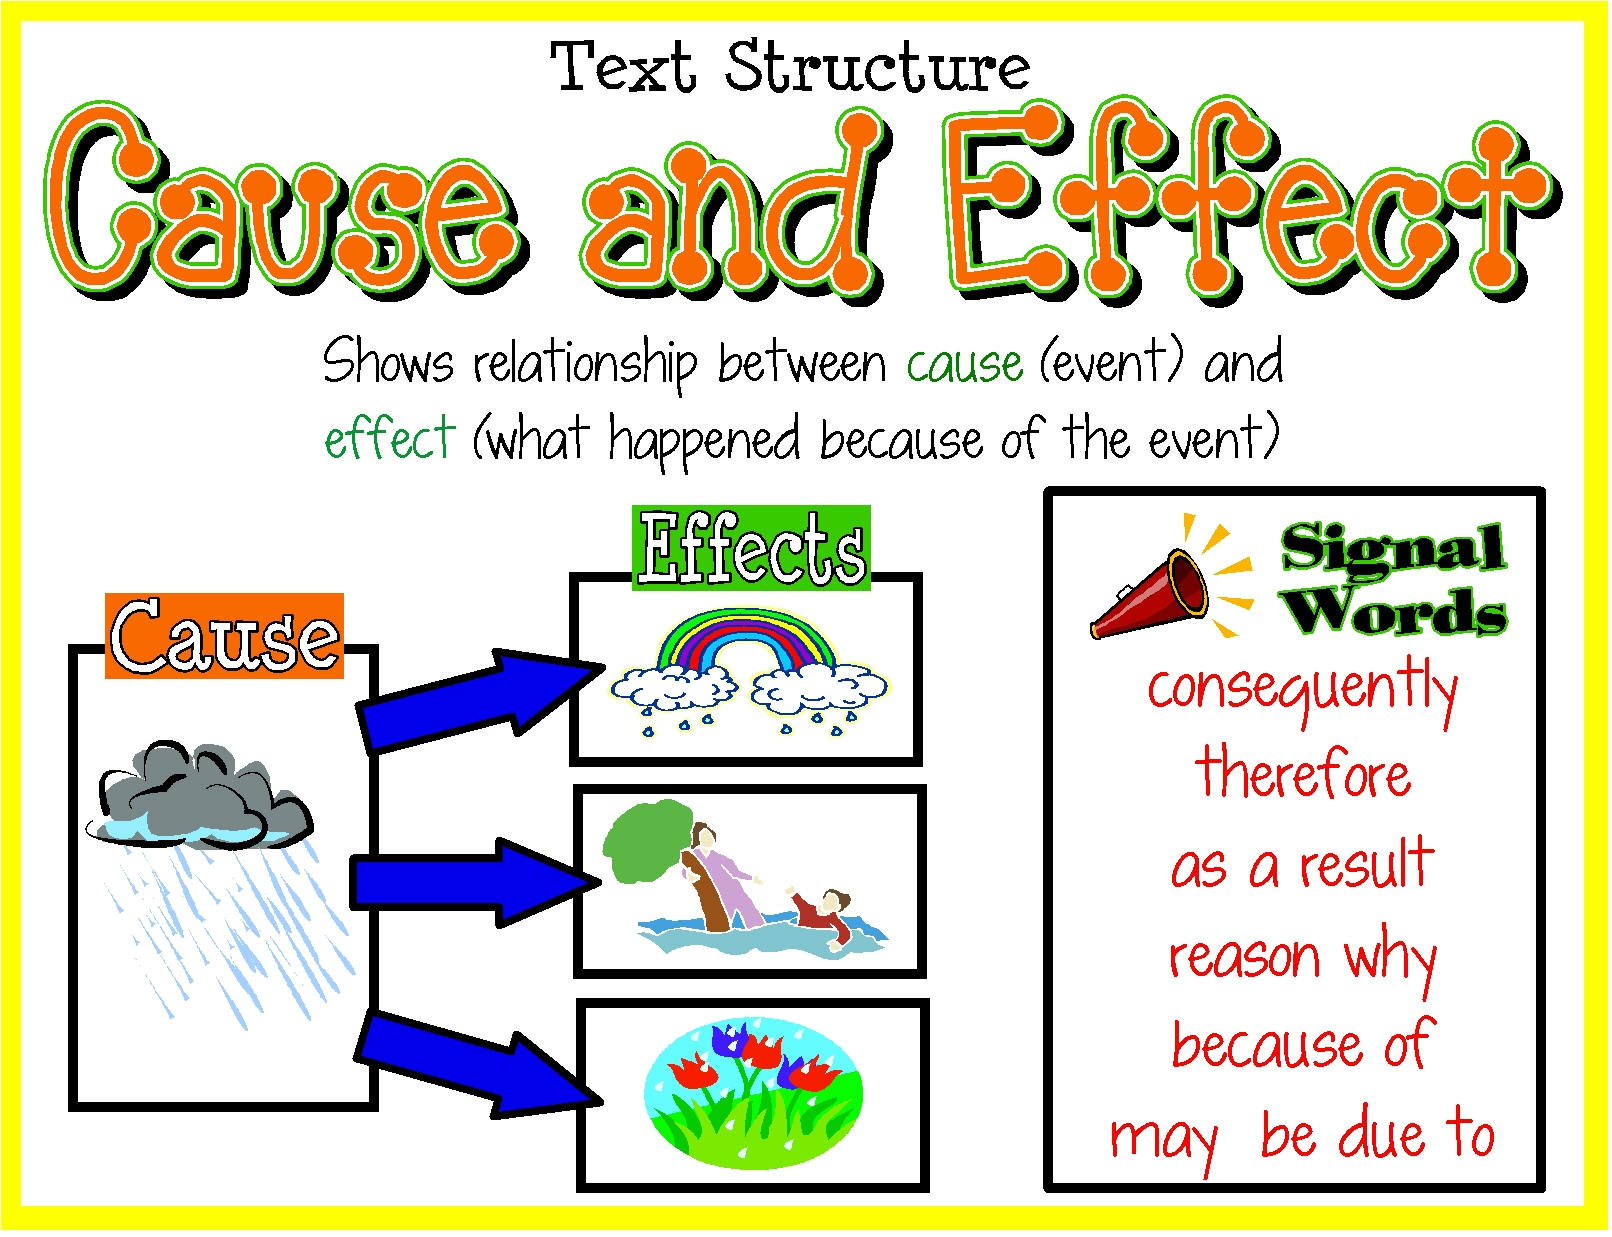 Cause and Effect. Cause and Effect в английском. Cause and Effect essay. Cause-and-Effect relationships. Cause to happen